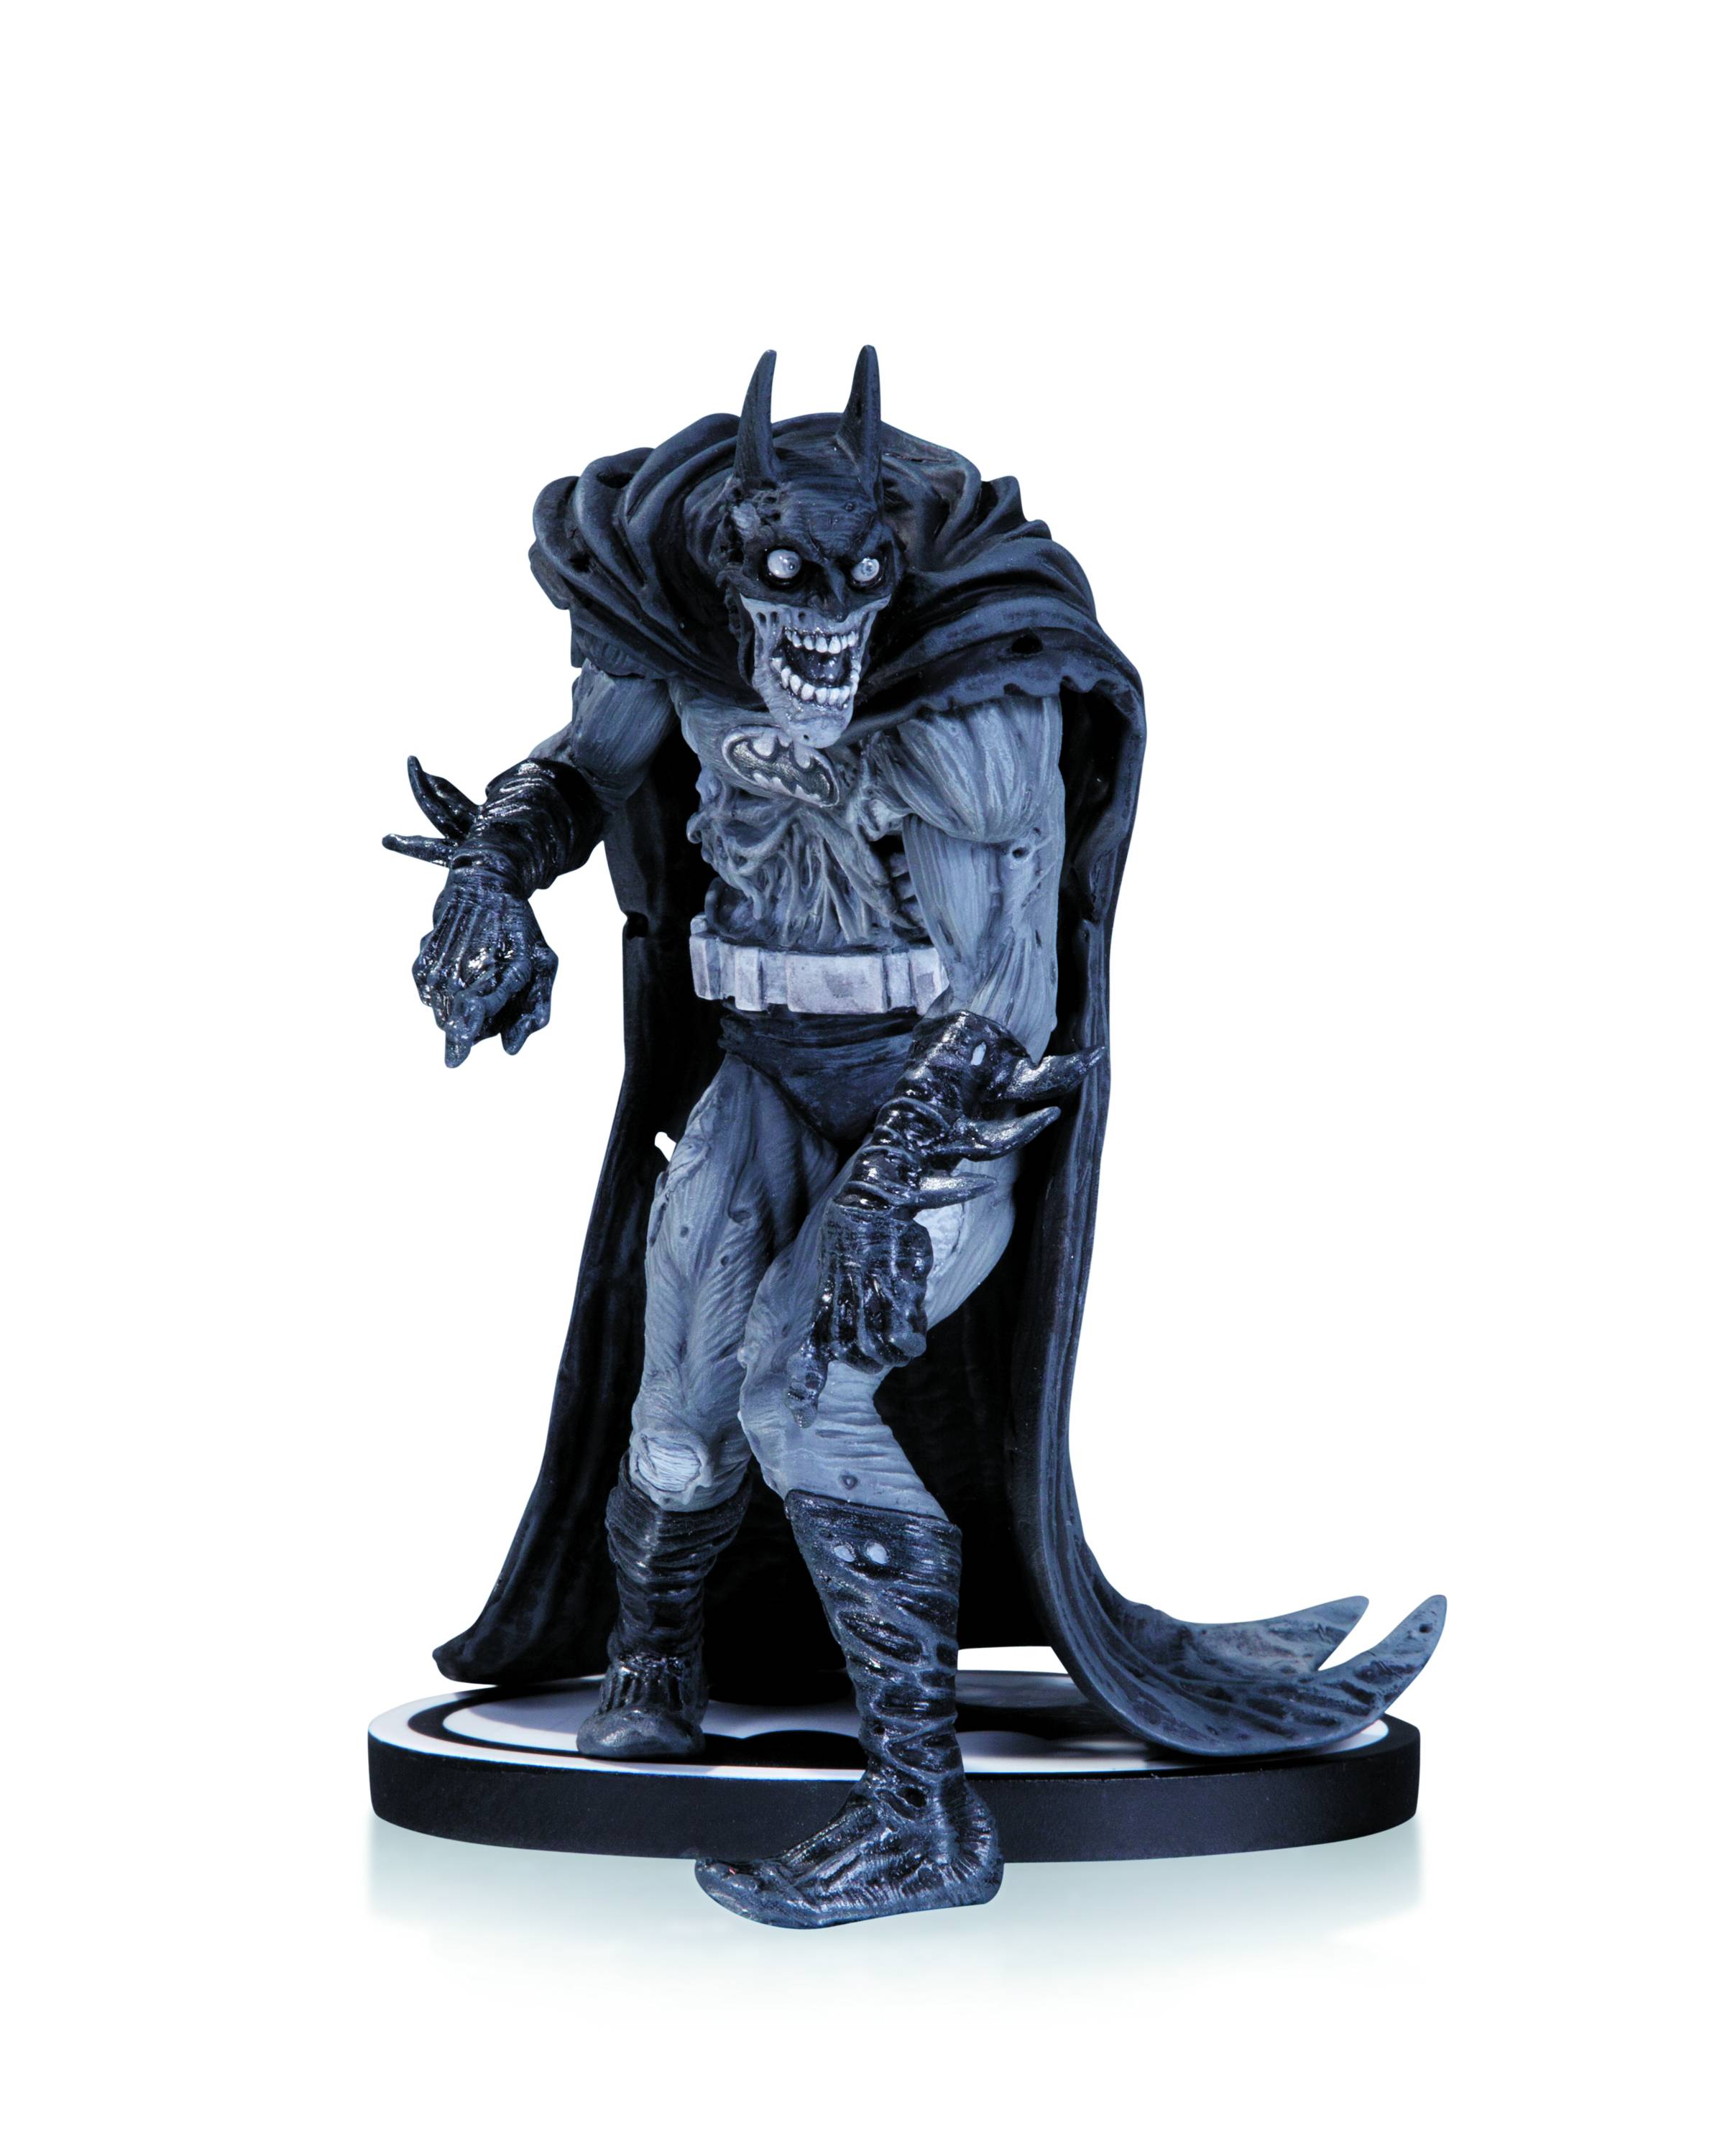 Which Batman Statue is the Best?